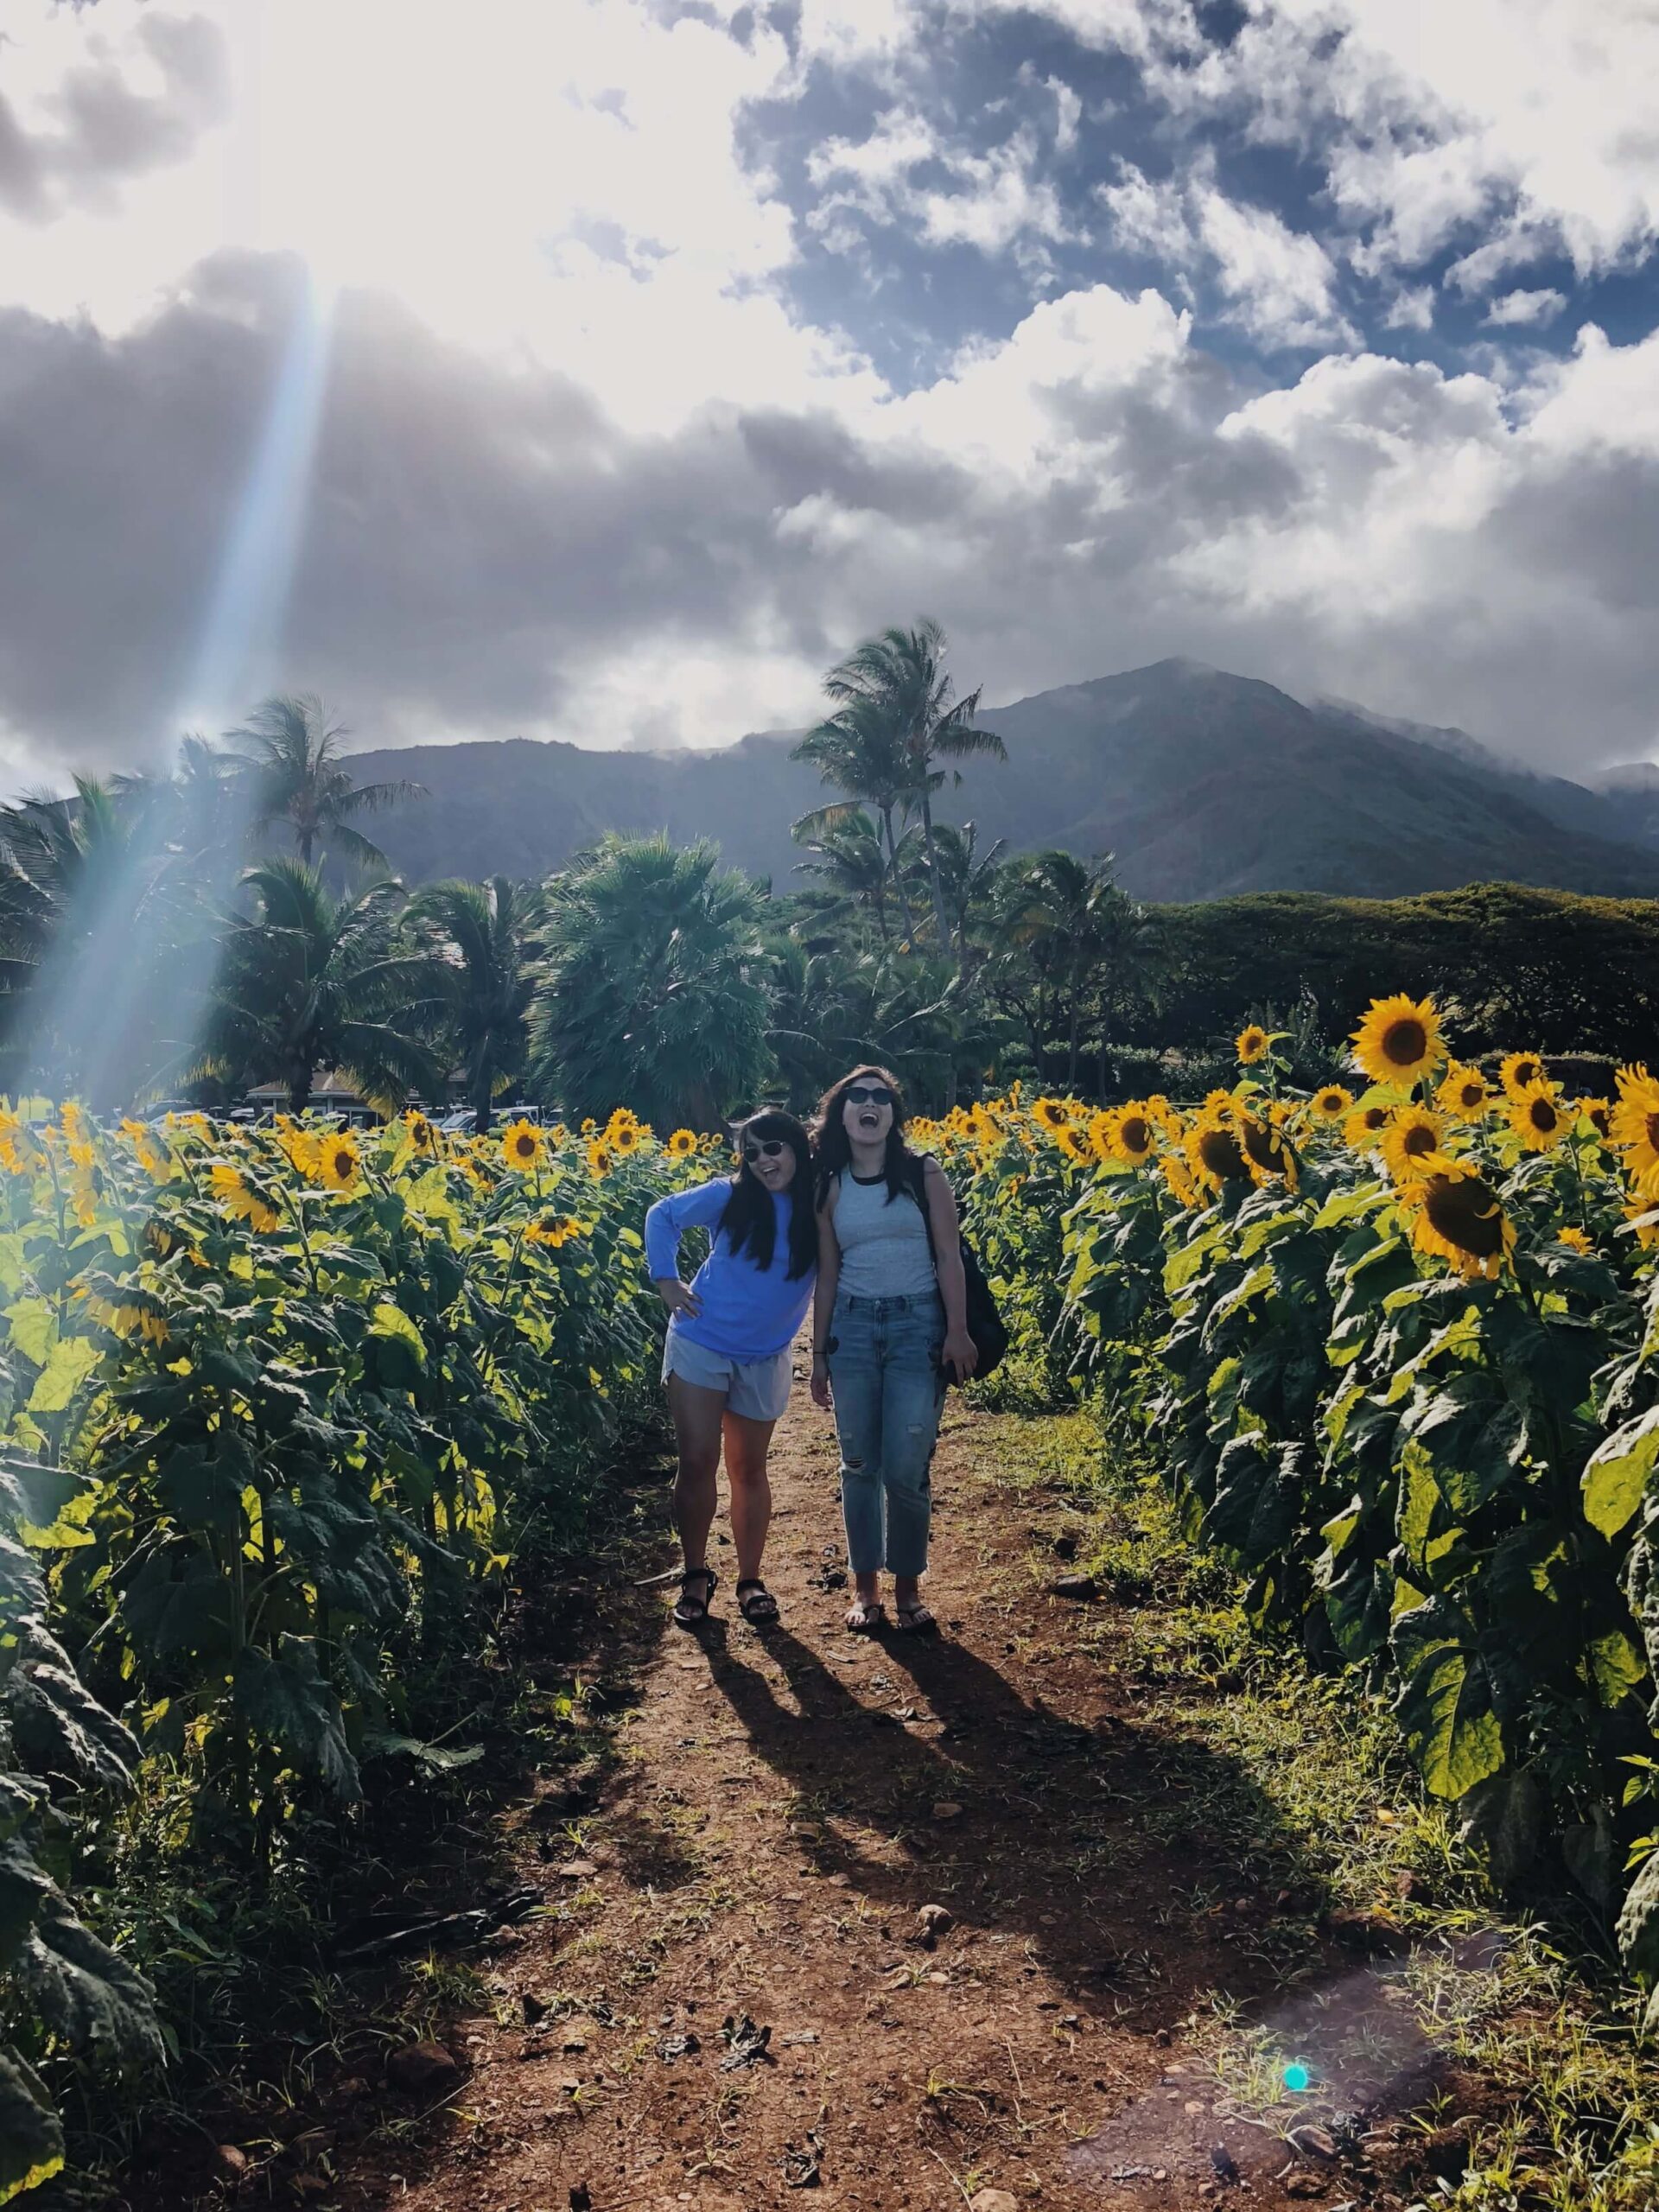 Kaitlin and Sarah in field of sunflowers in Maui